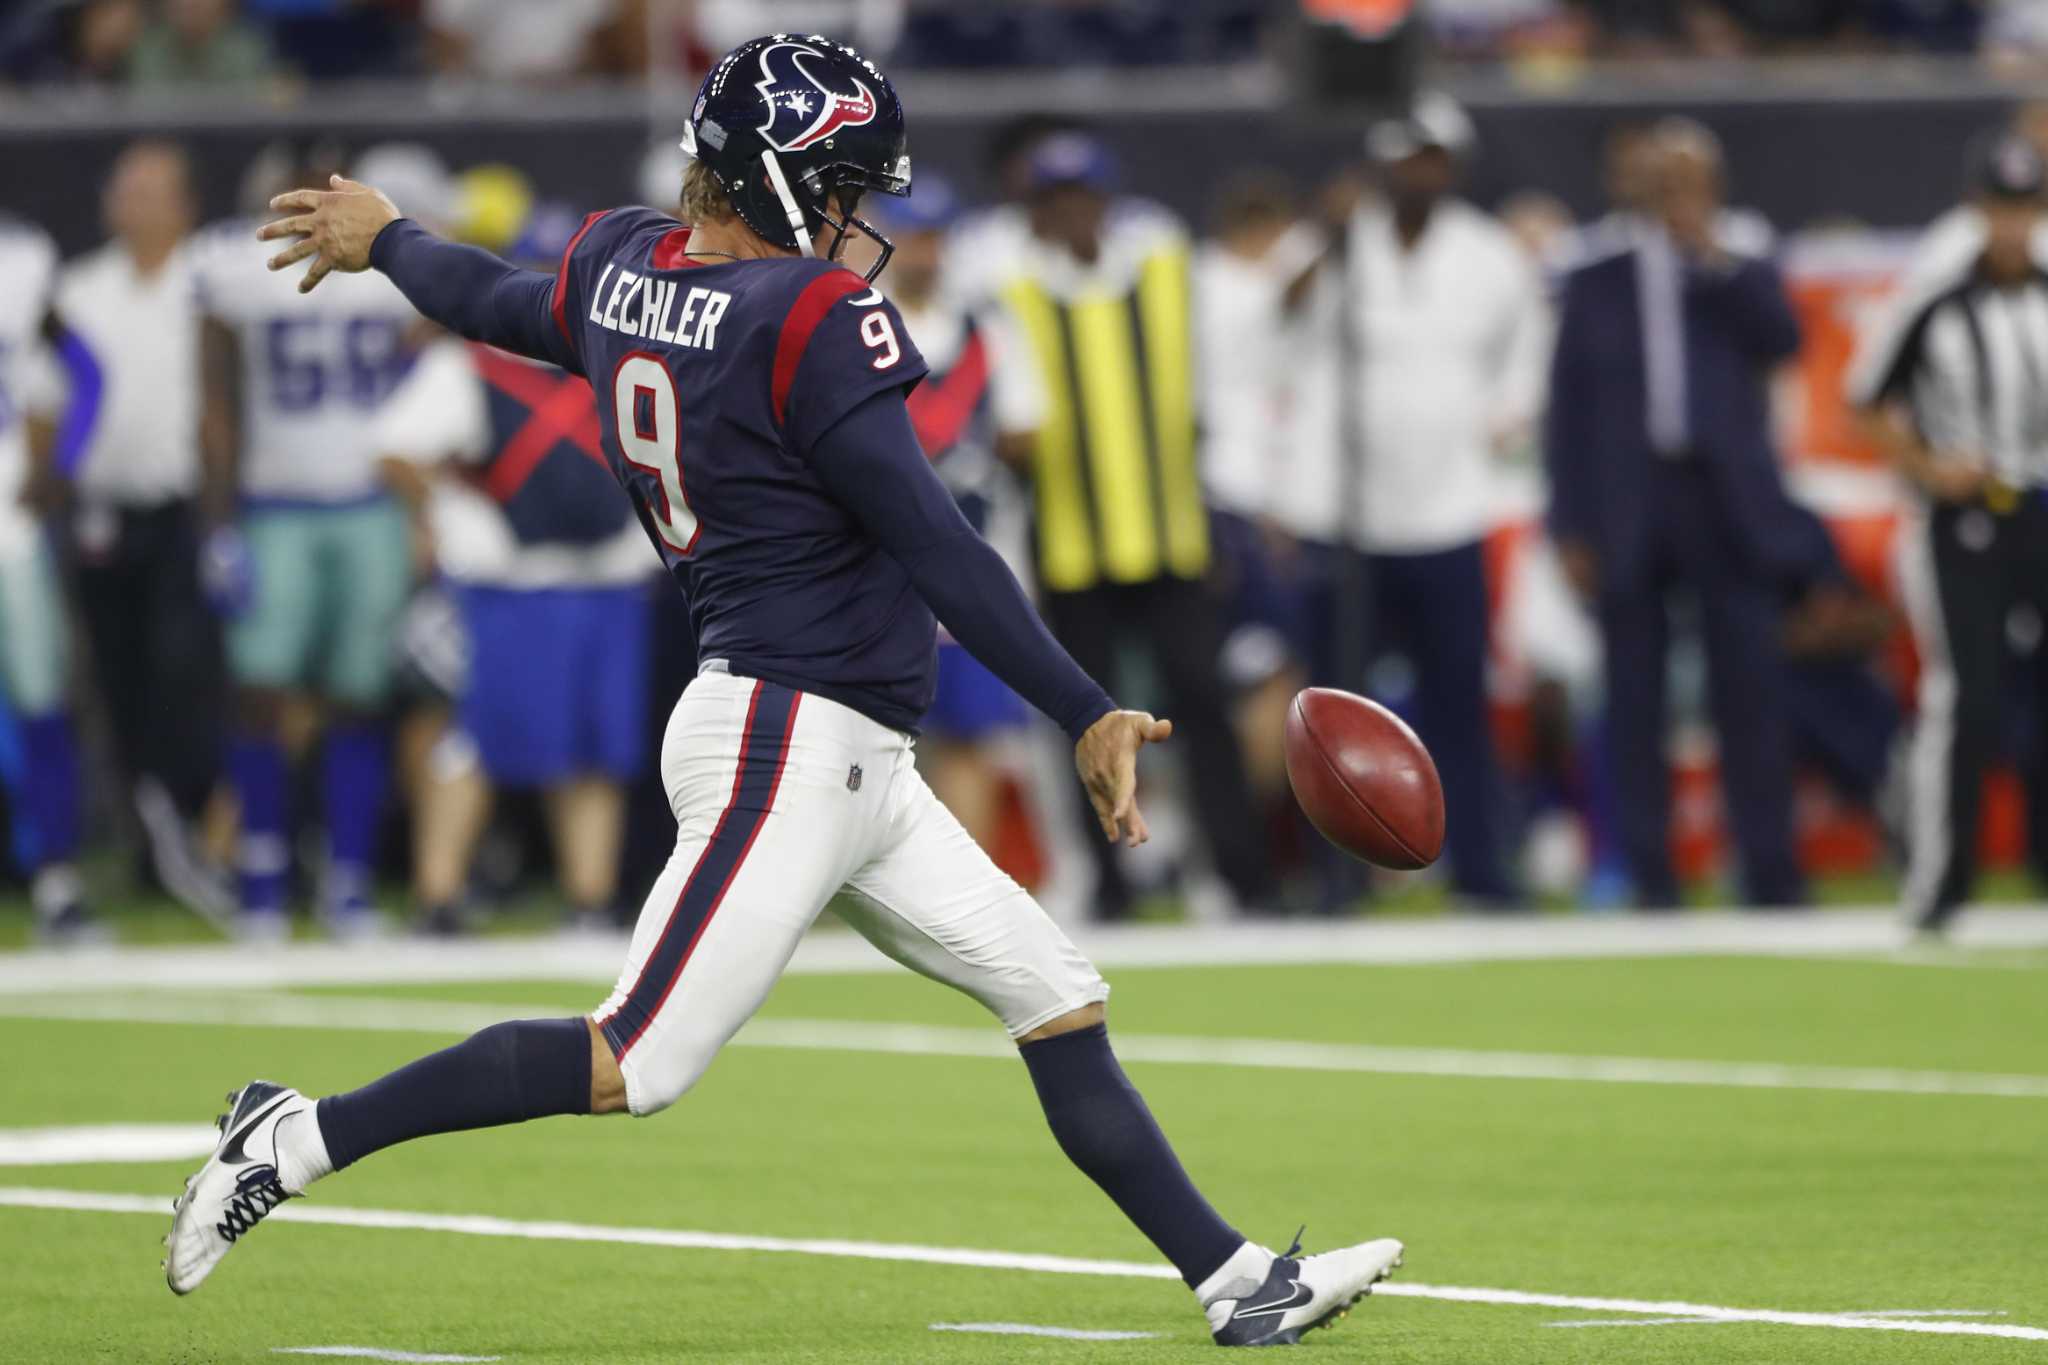 Shane Lechler's long goodbye was a real 